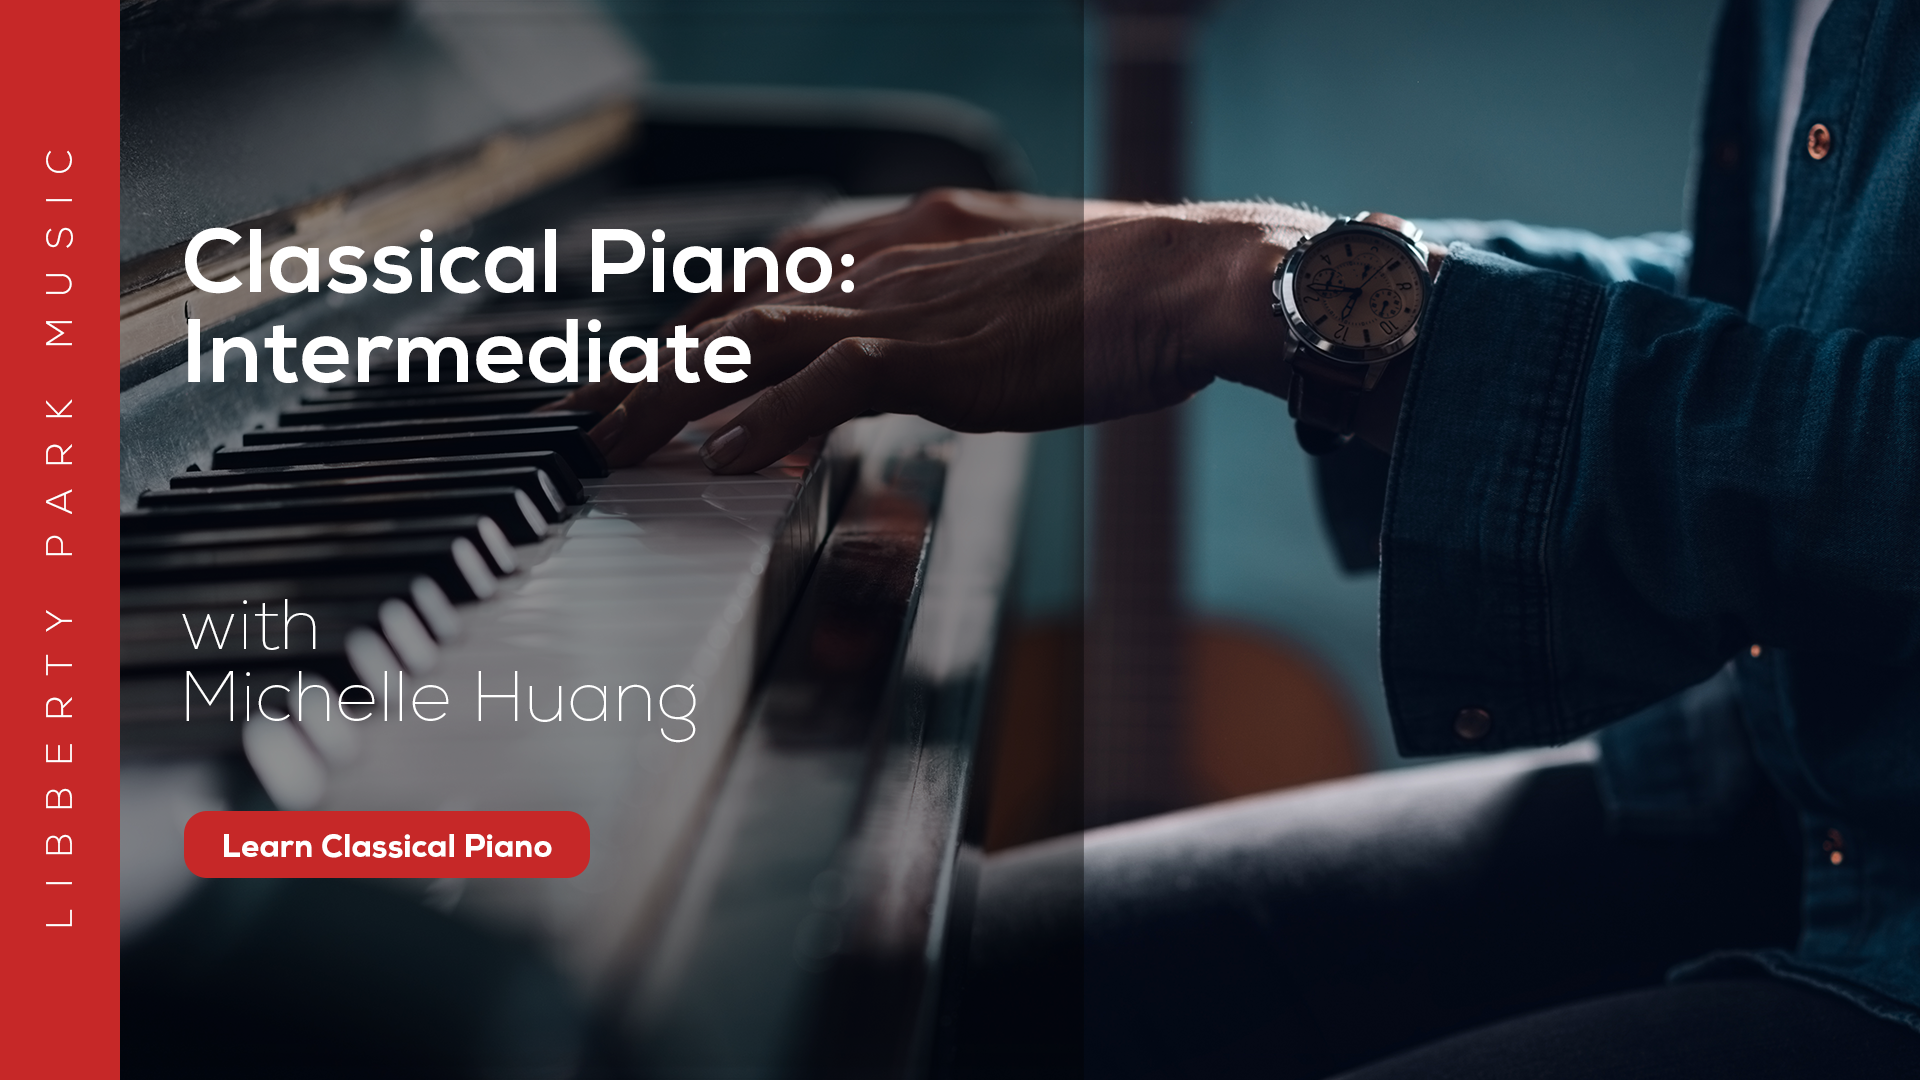 Classical piano online course for intermediate level